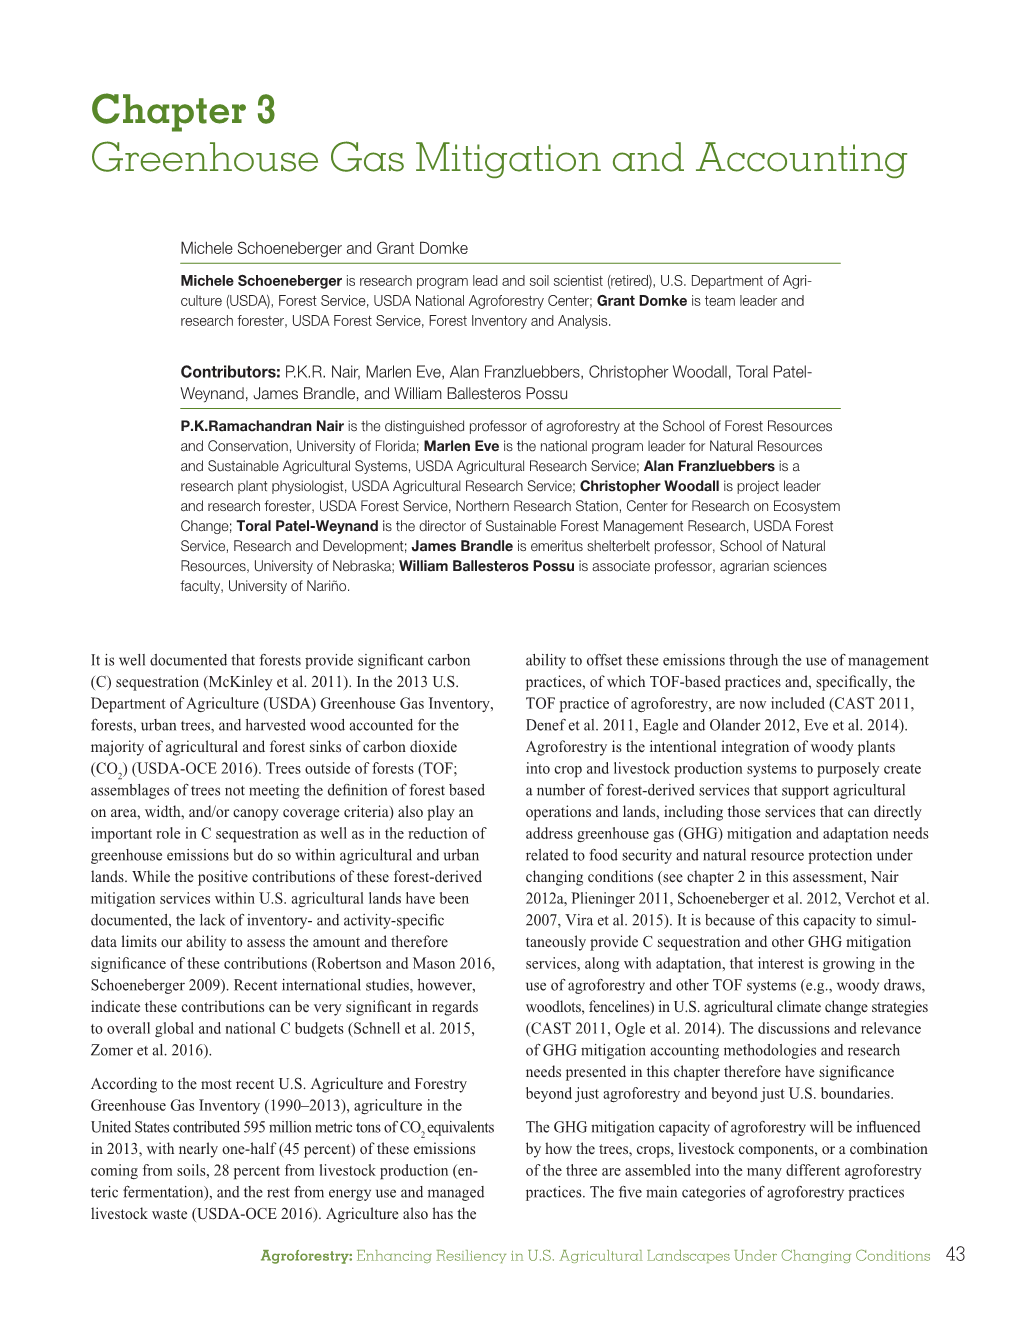 Greenhouse Gas Mitigation and Accounting. In: Agroforestry